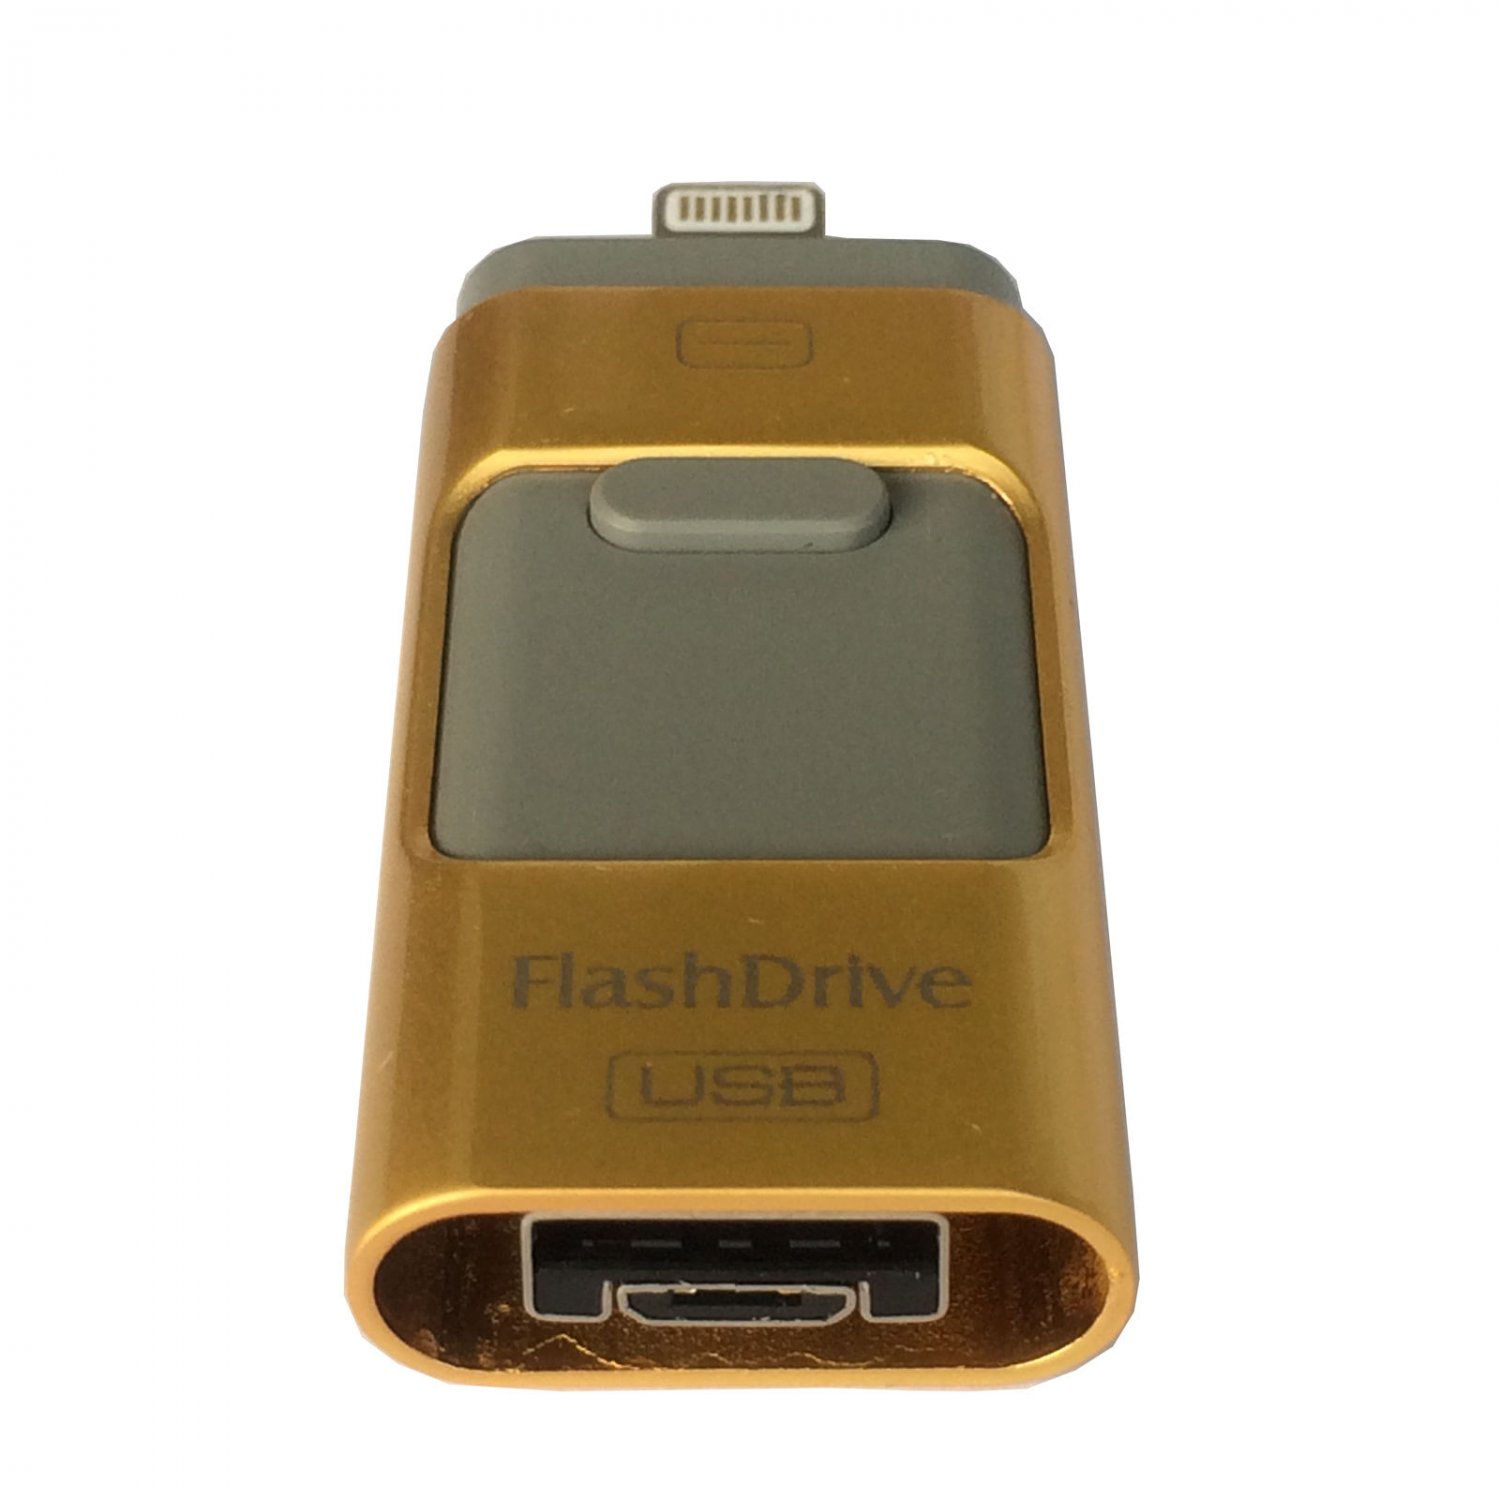 best iflash drive for iphone 7 plus